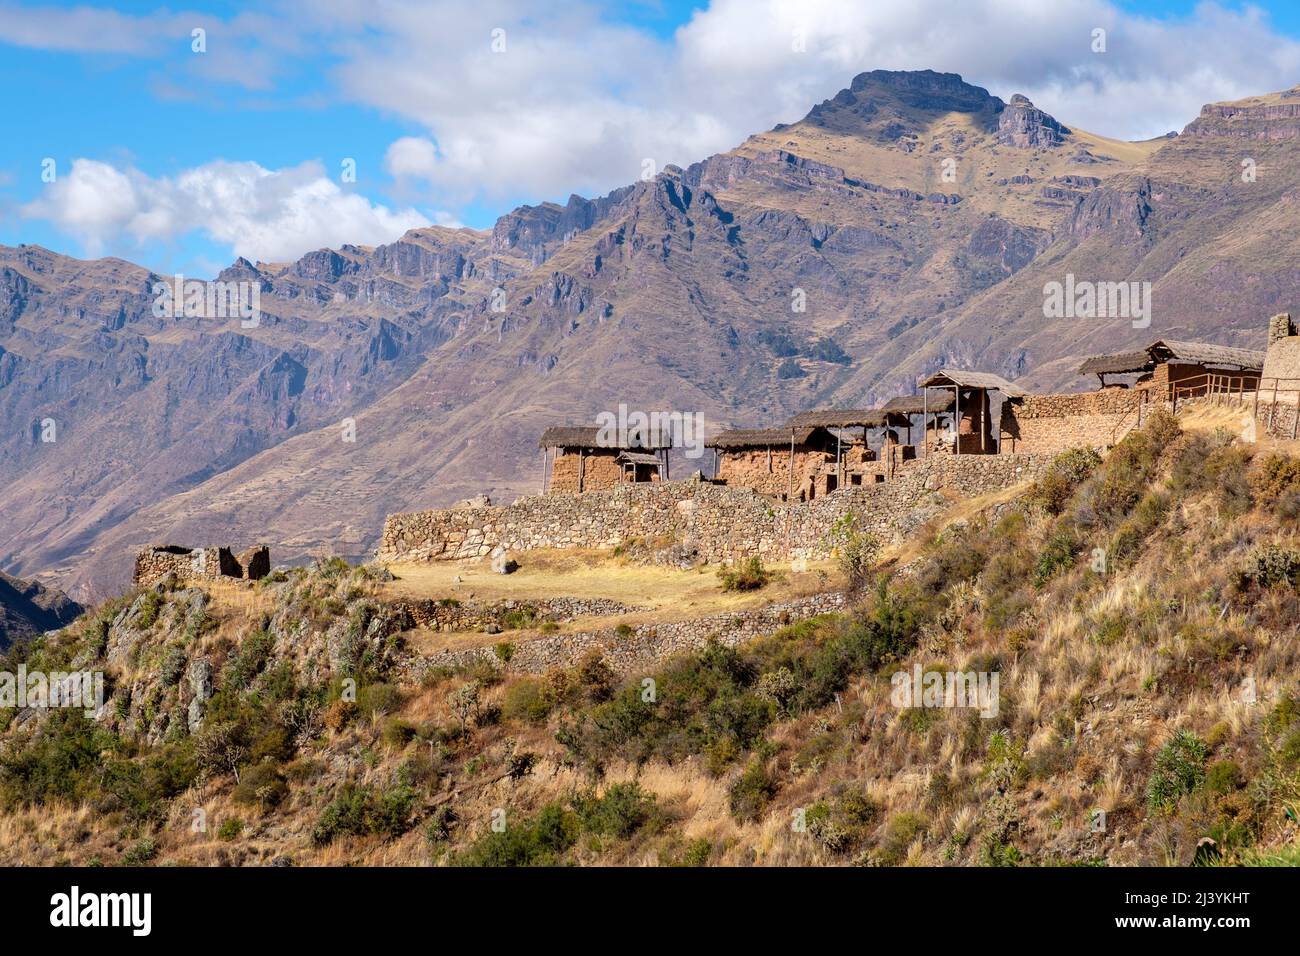 Mountains and Qantas Raqay sector of Pisac Inca ancient ruins, city of Pisac, Sacred Valley, Peru. Stock Photo